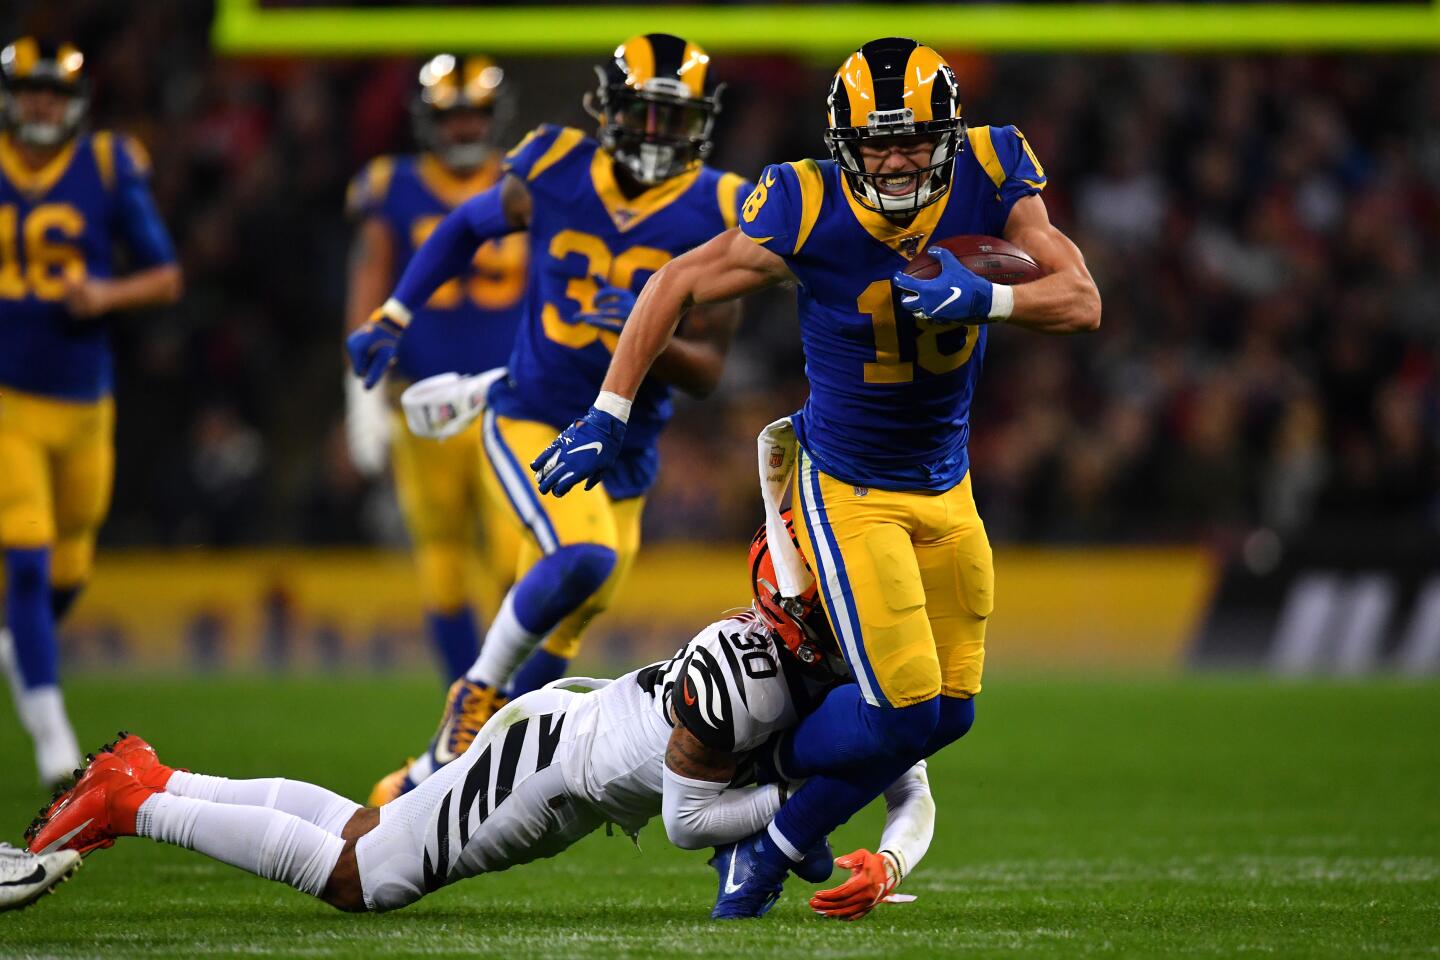 Rams receiver Cooper Kupp is tackled by Bengals defensive back Jessie Bates.